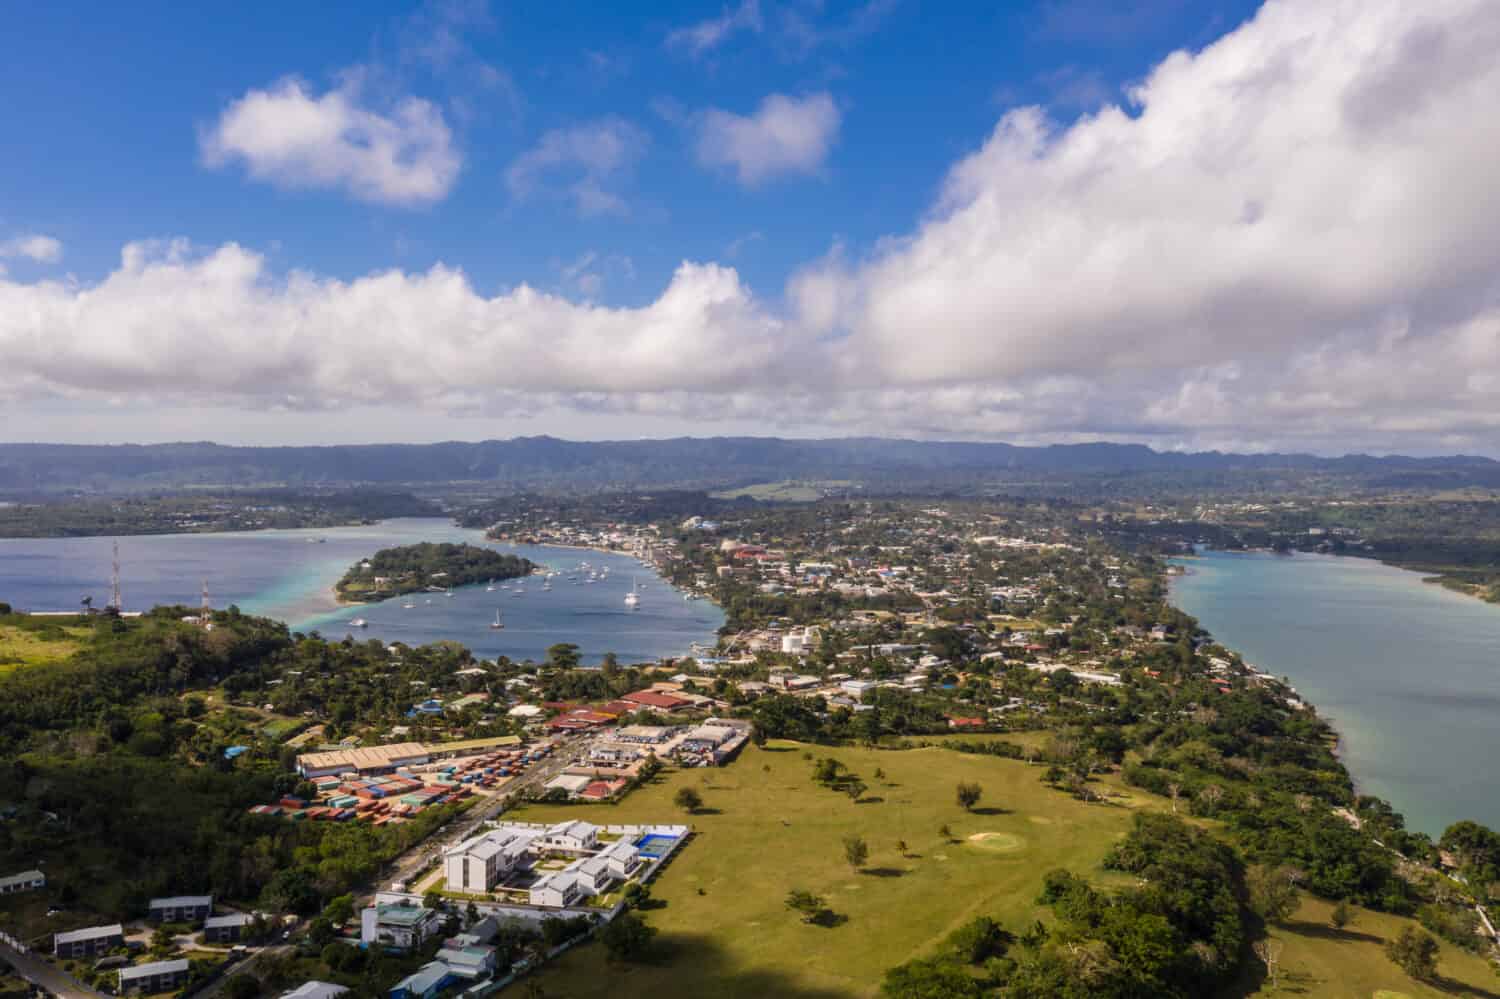 Aerial view of the Port Vila city and bay with the Iririki resort island in Vanuatu capital city in the Pacific.